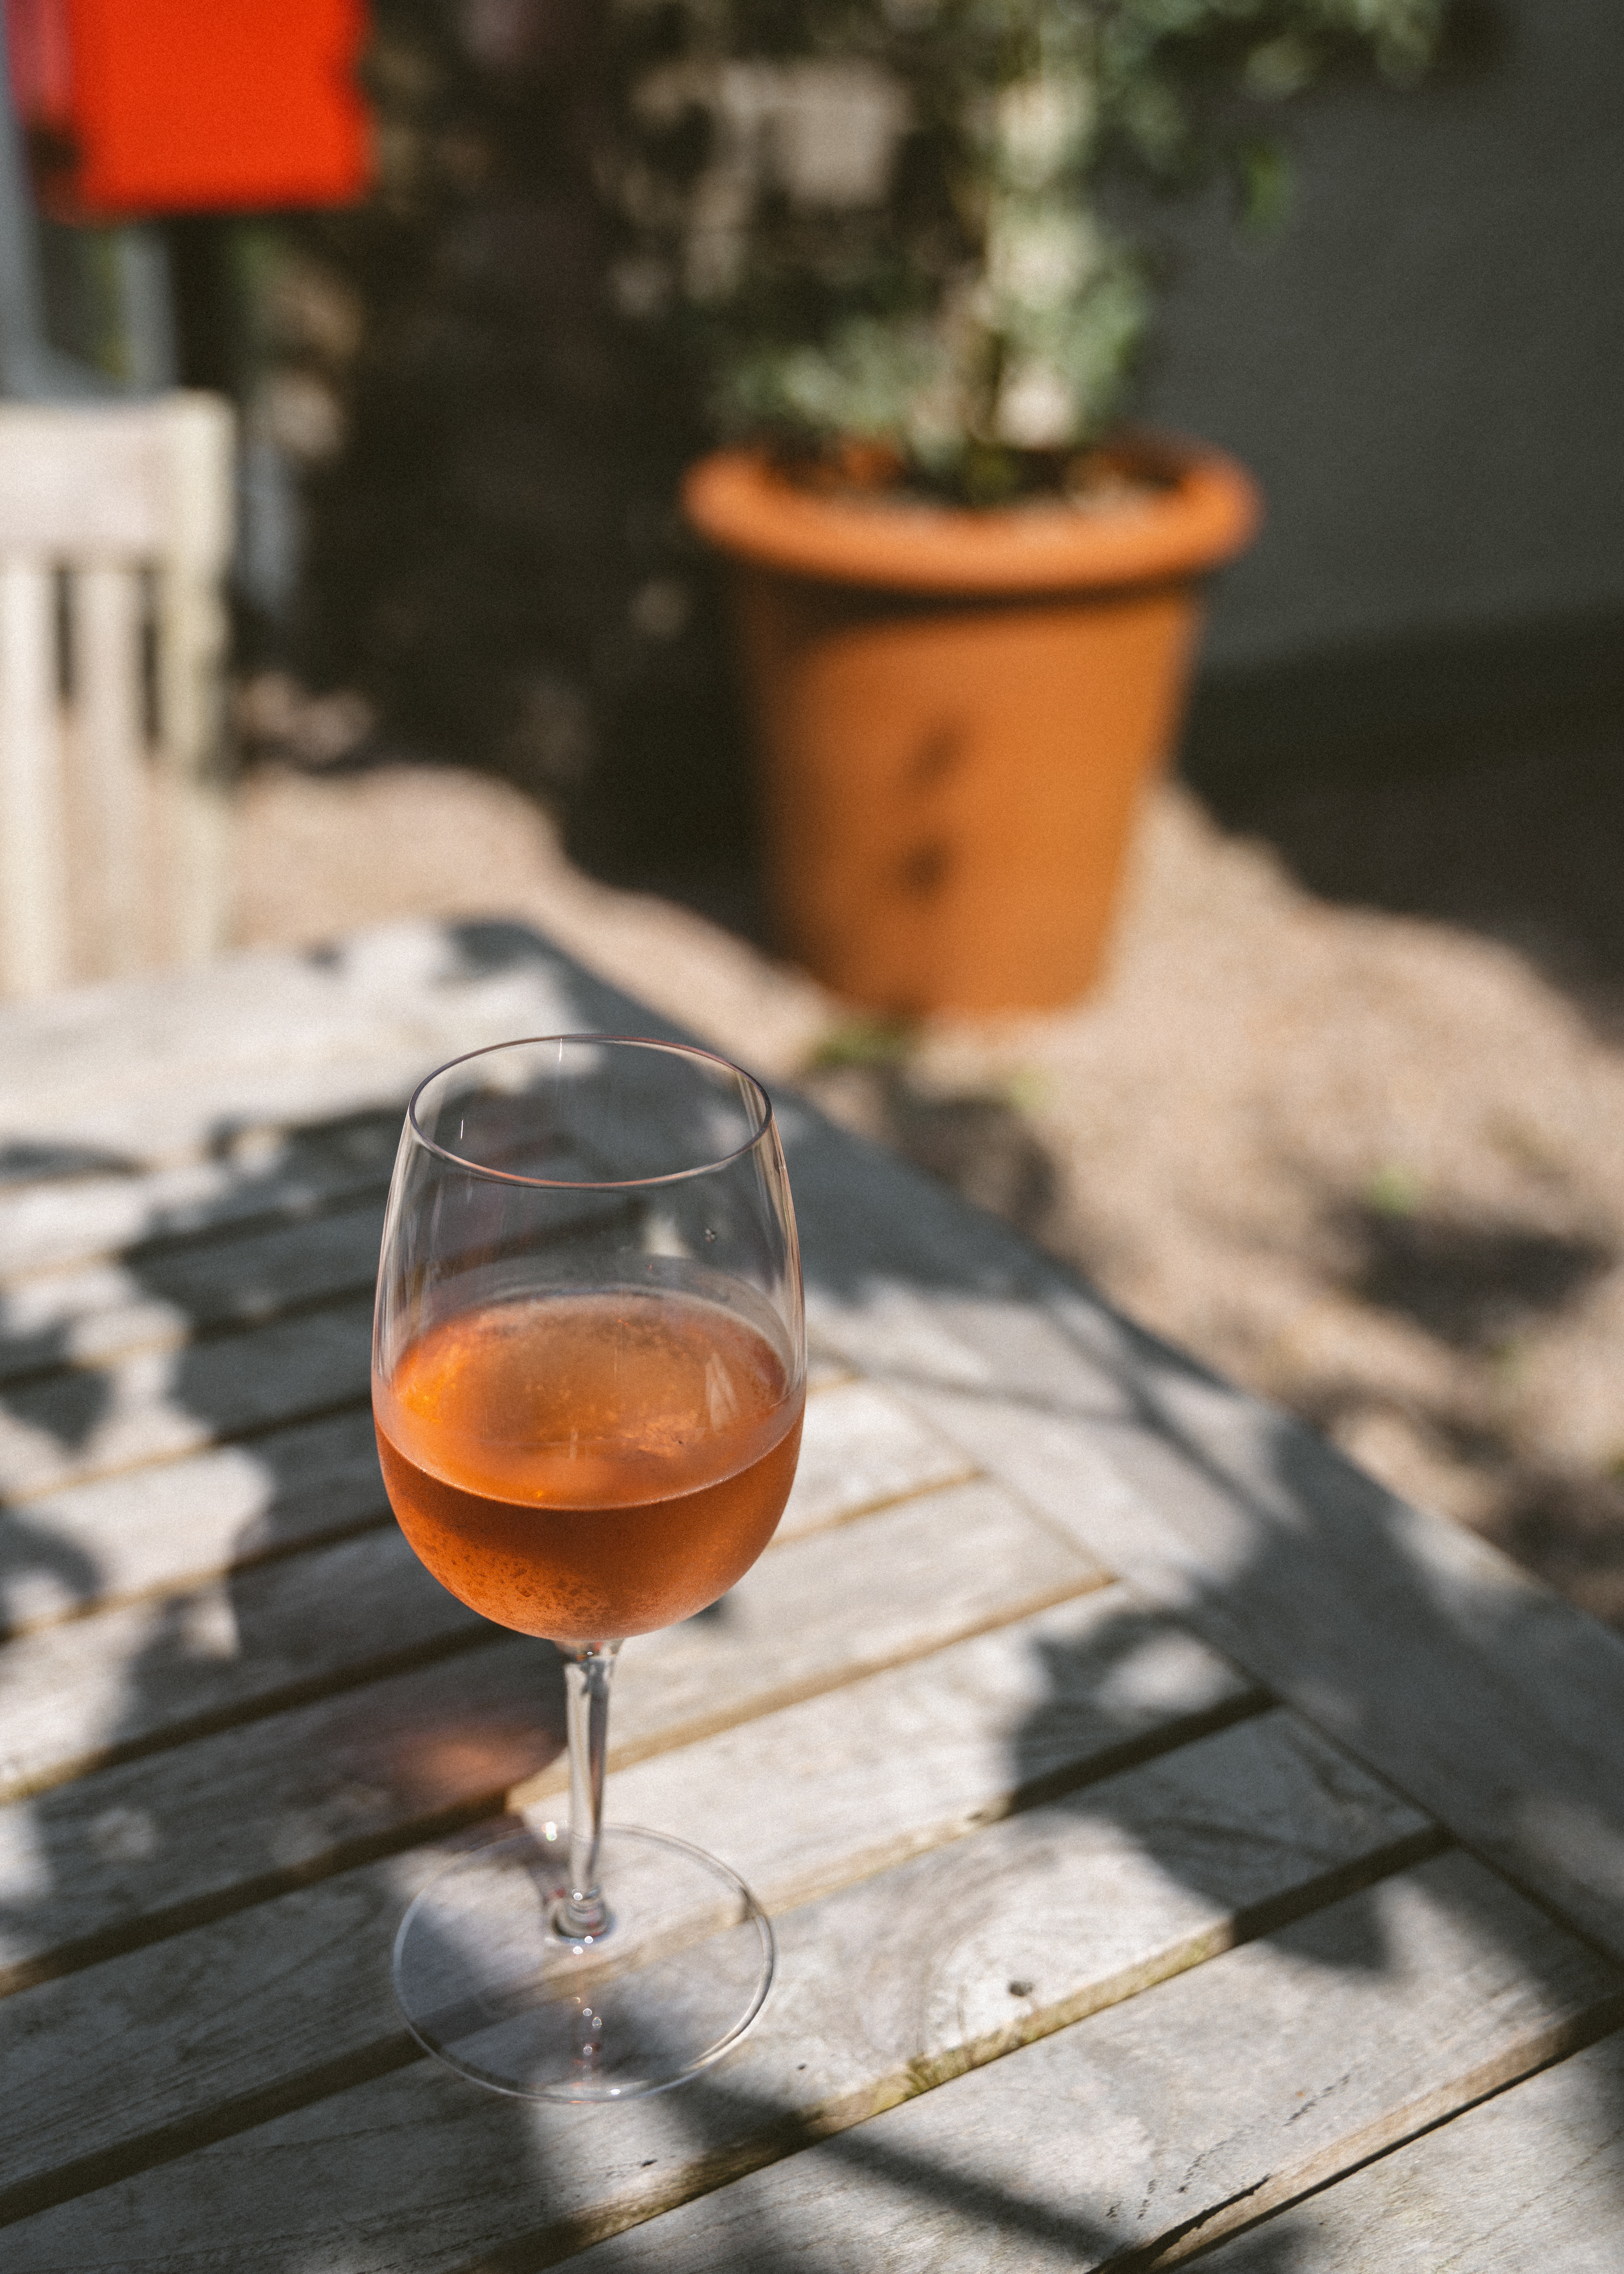 A summer refreshment on a glass of wine